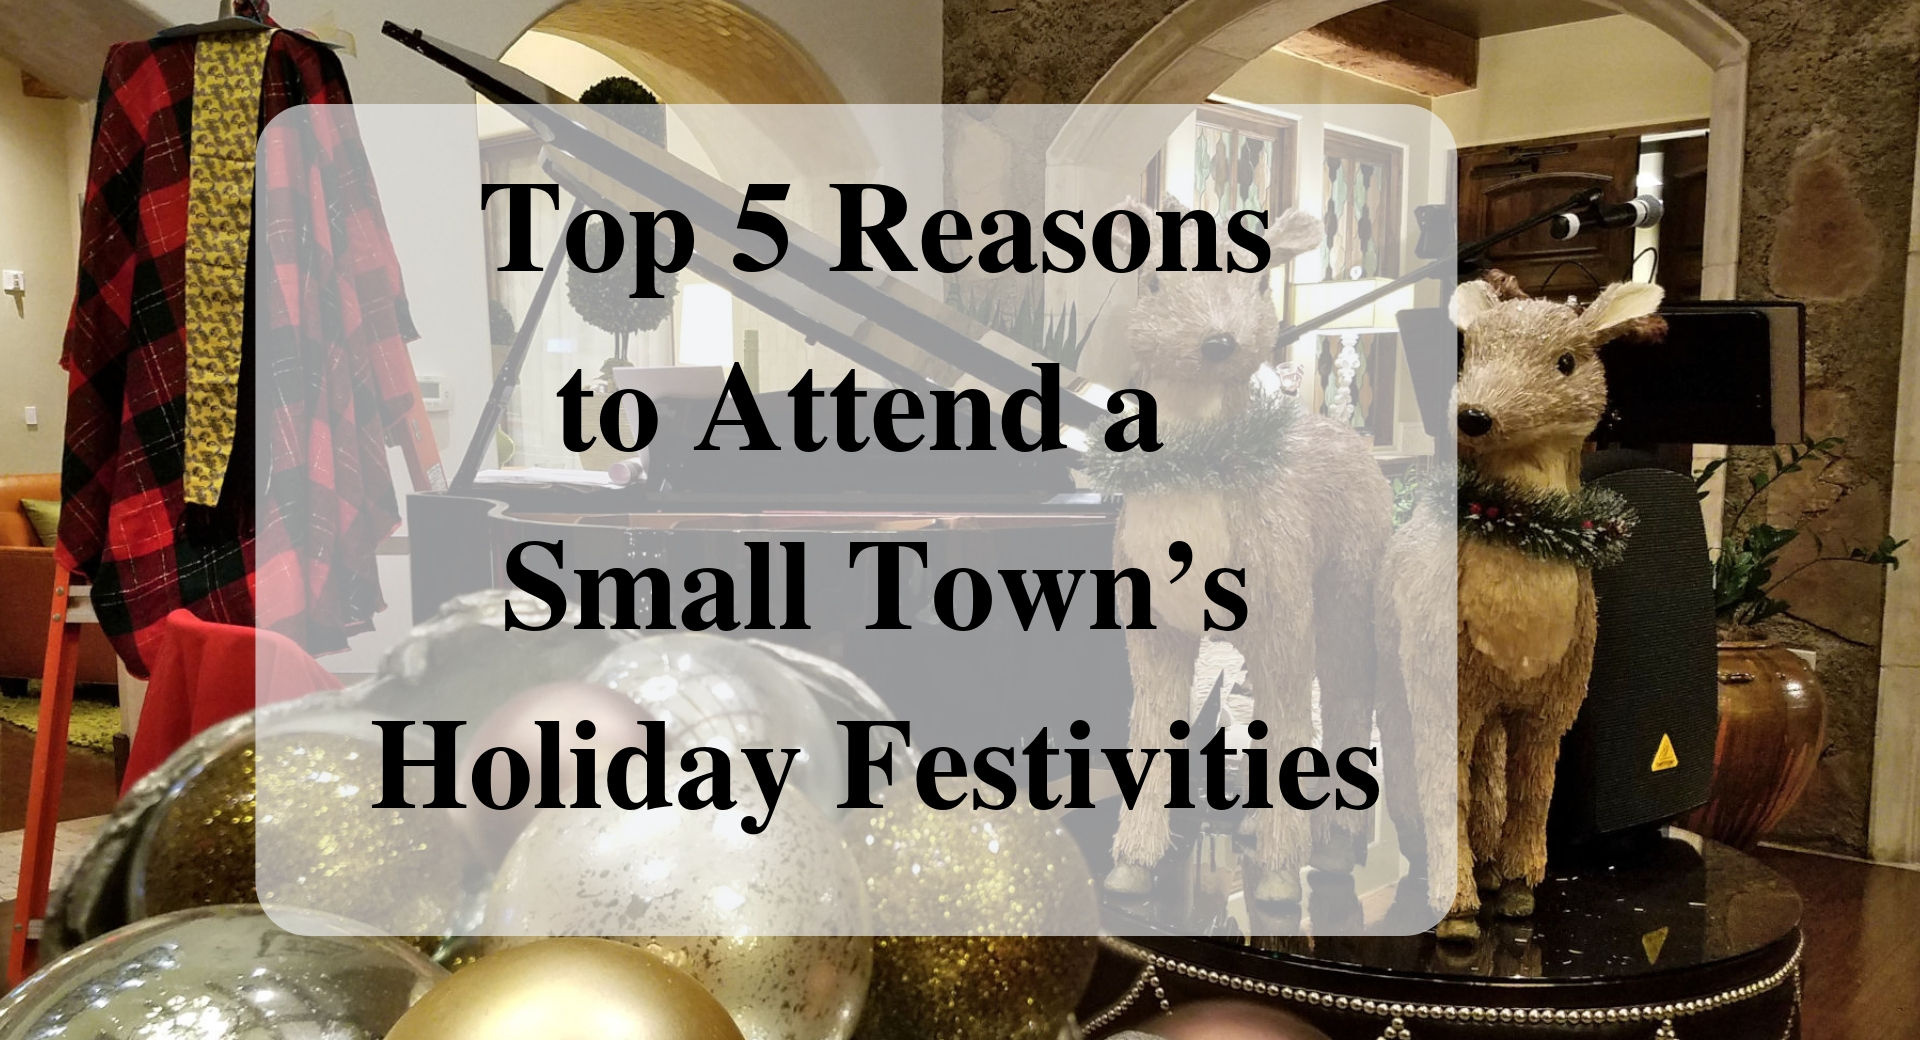 Top 5 Reasons to Attend a Small Town’s Holiday Festivities